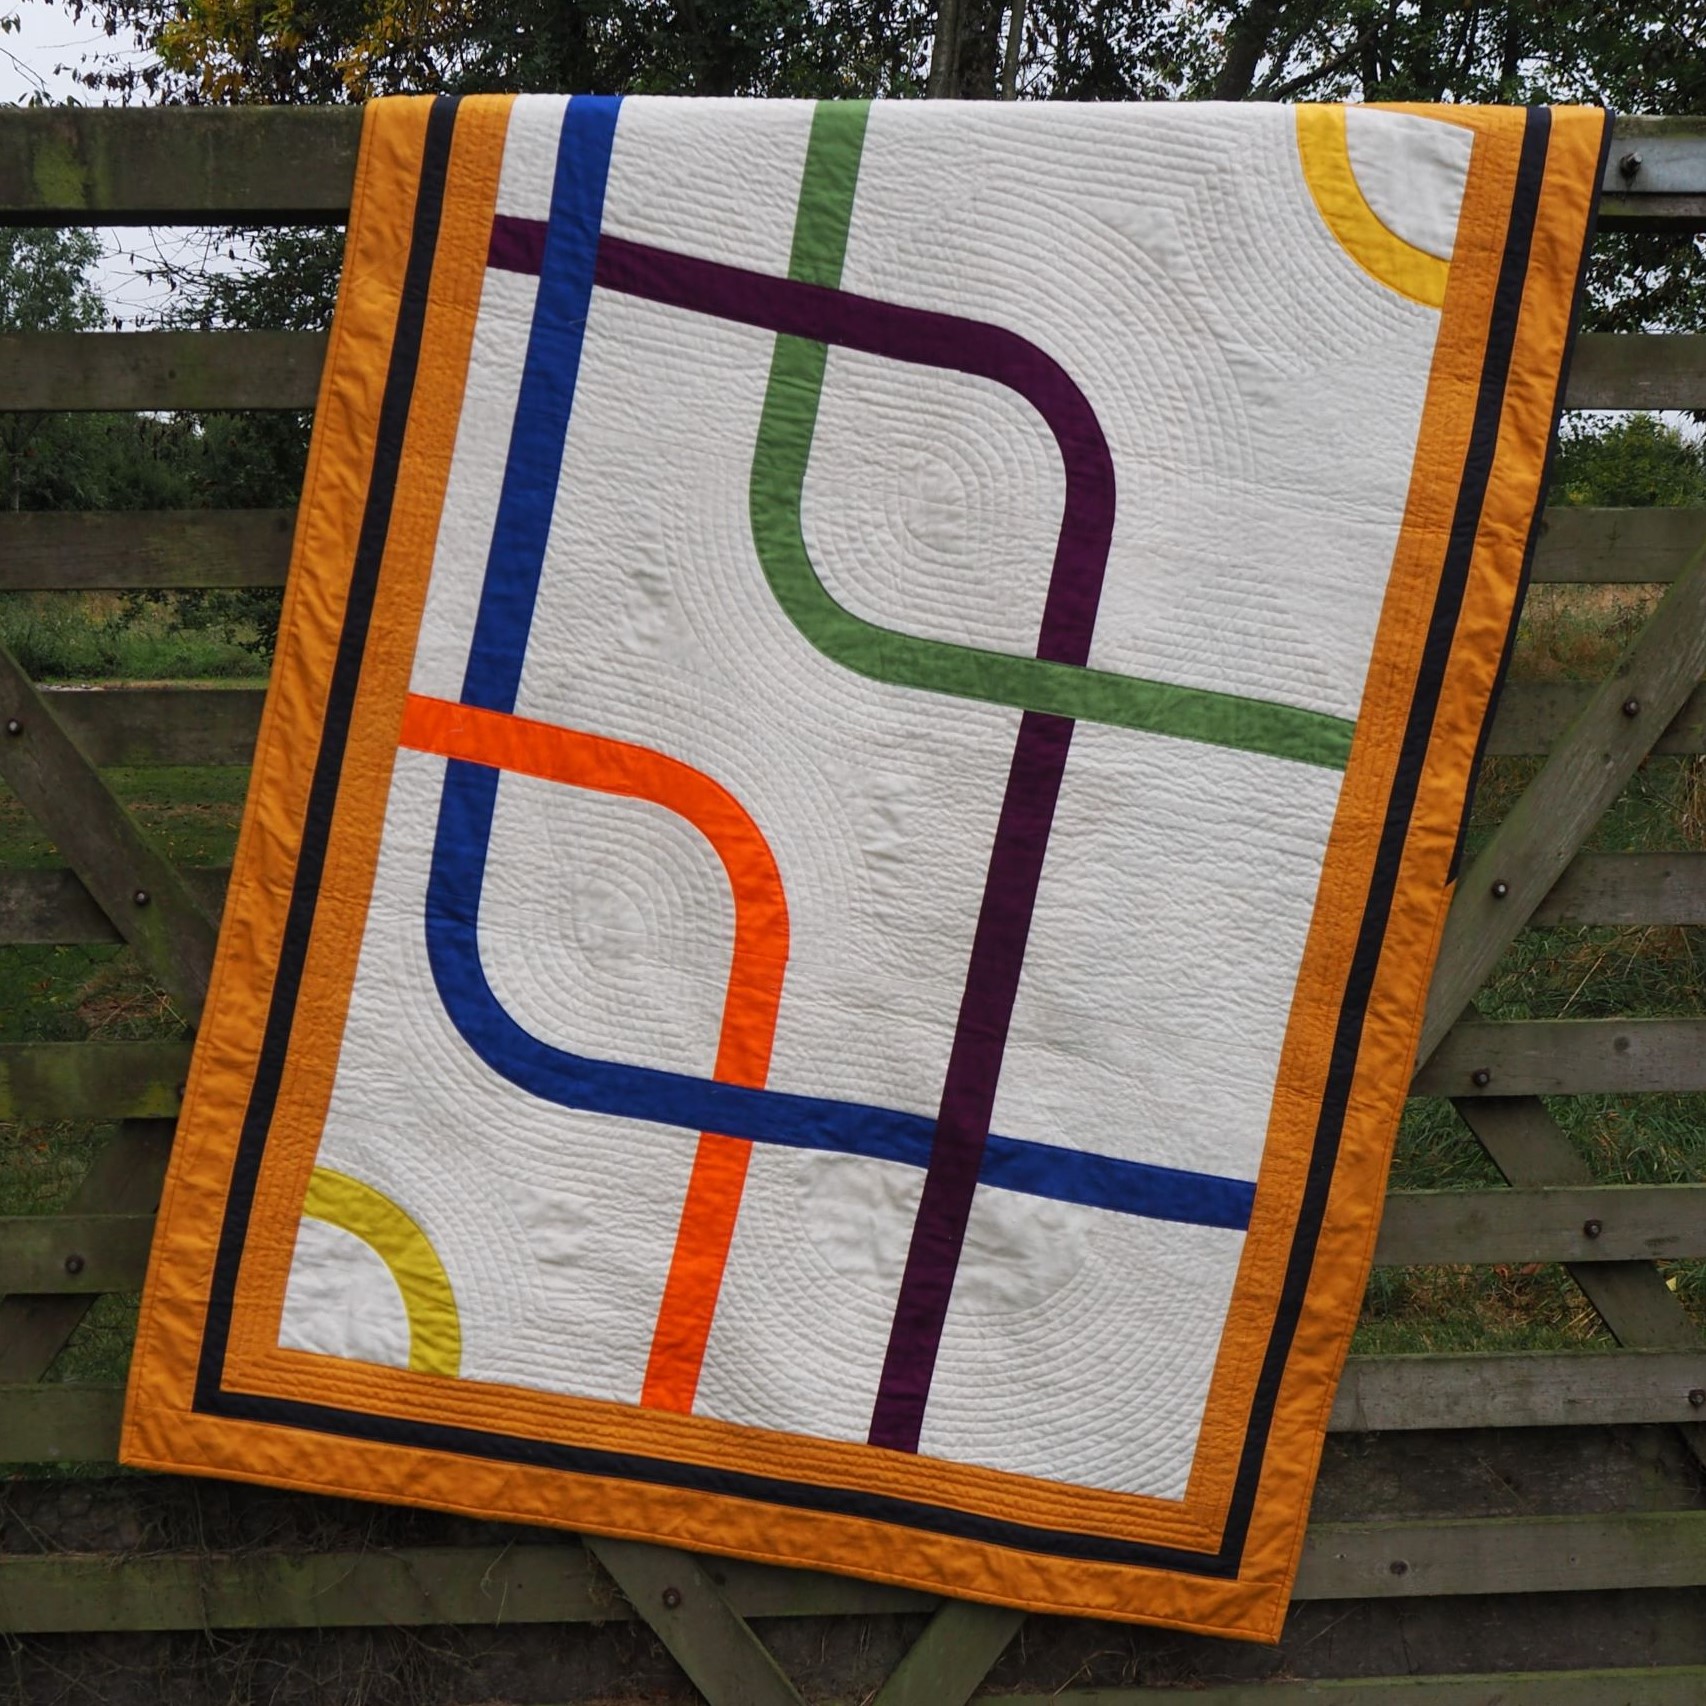 Quilt made using Modern Adapted Drunkard's Path blocks in colours to reflect lines of the London Underground, set into a white background. Walking foot quilting